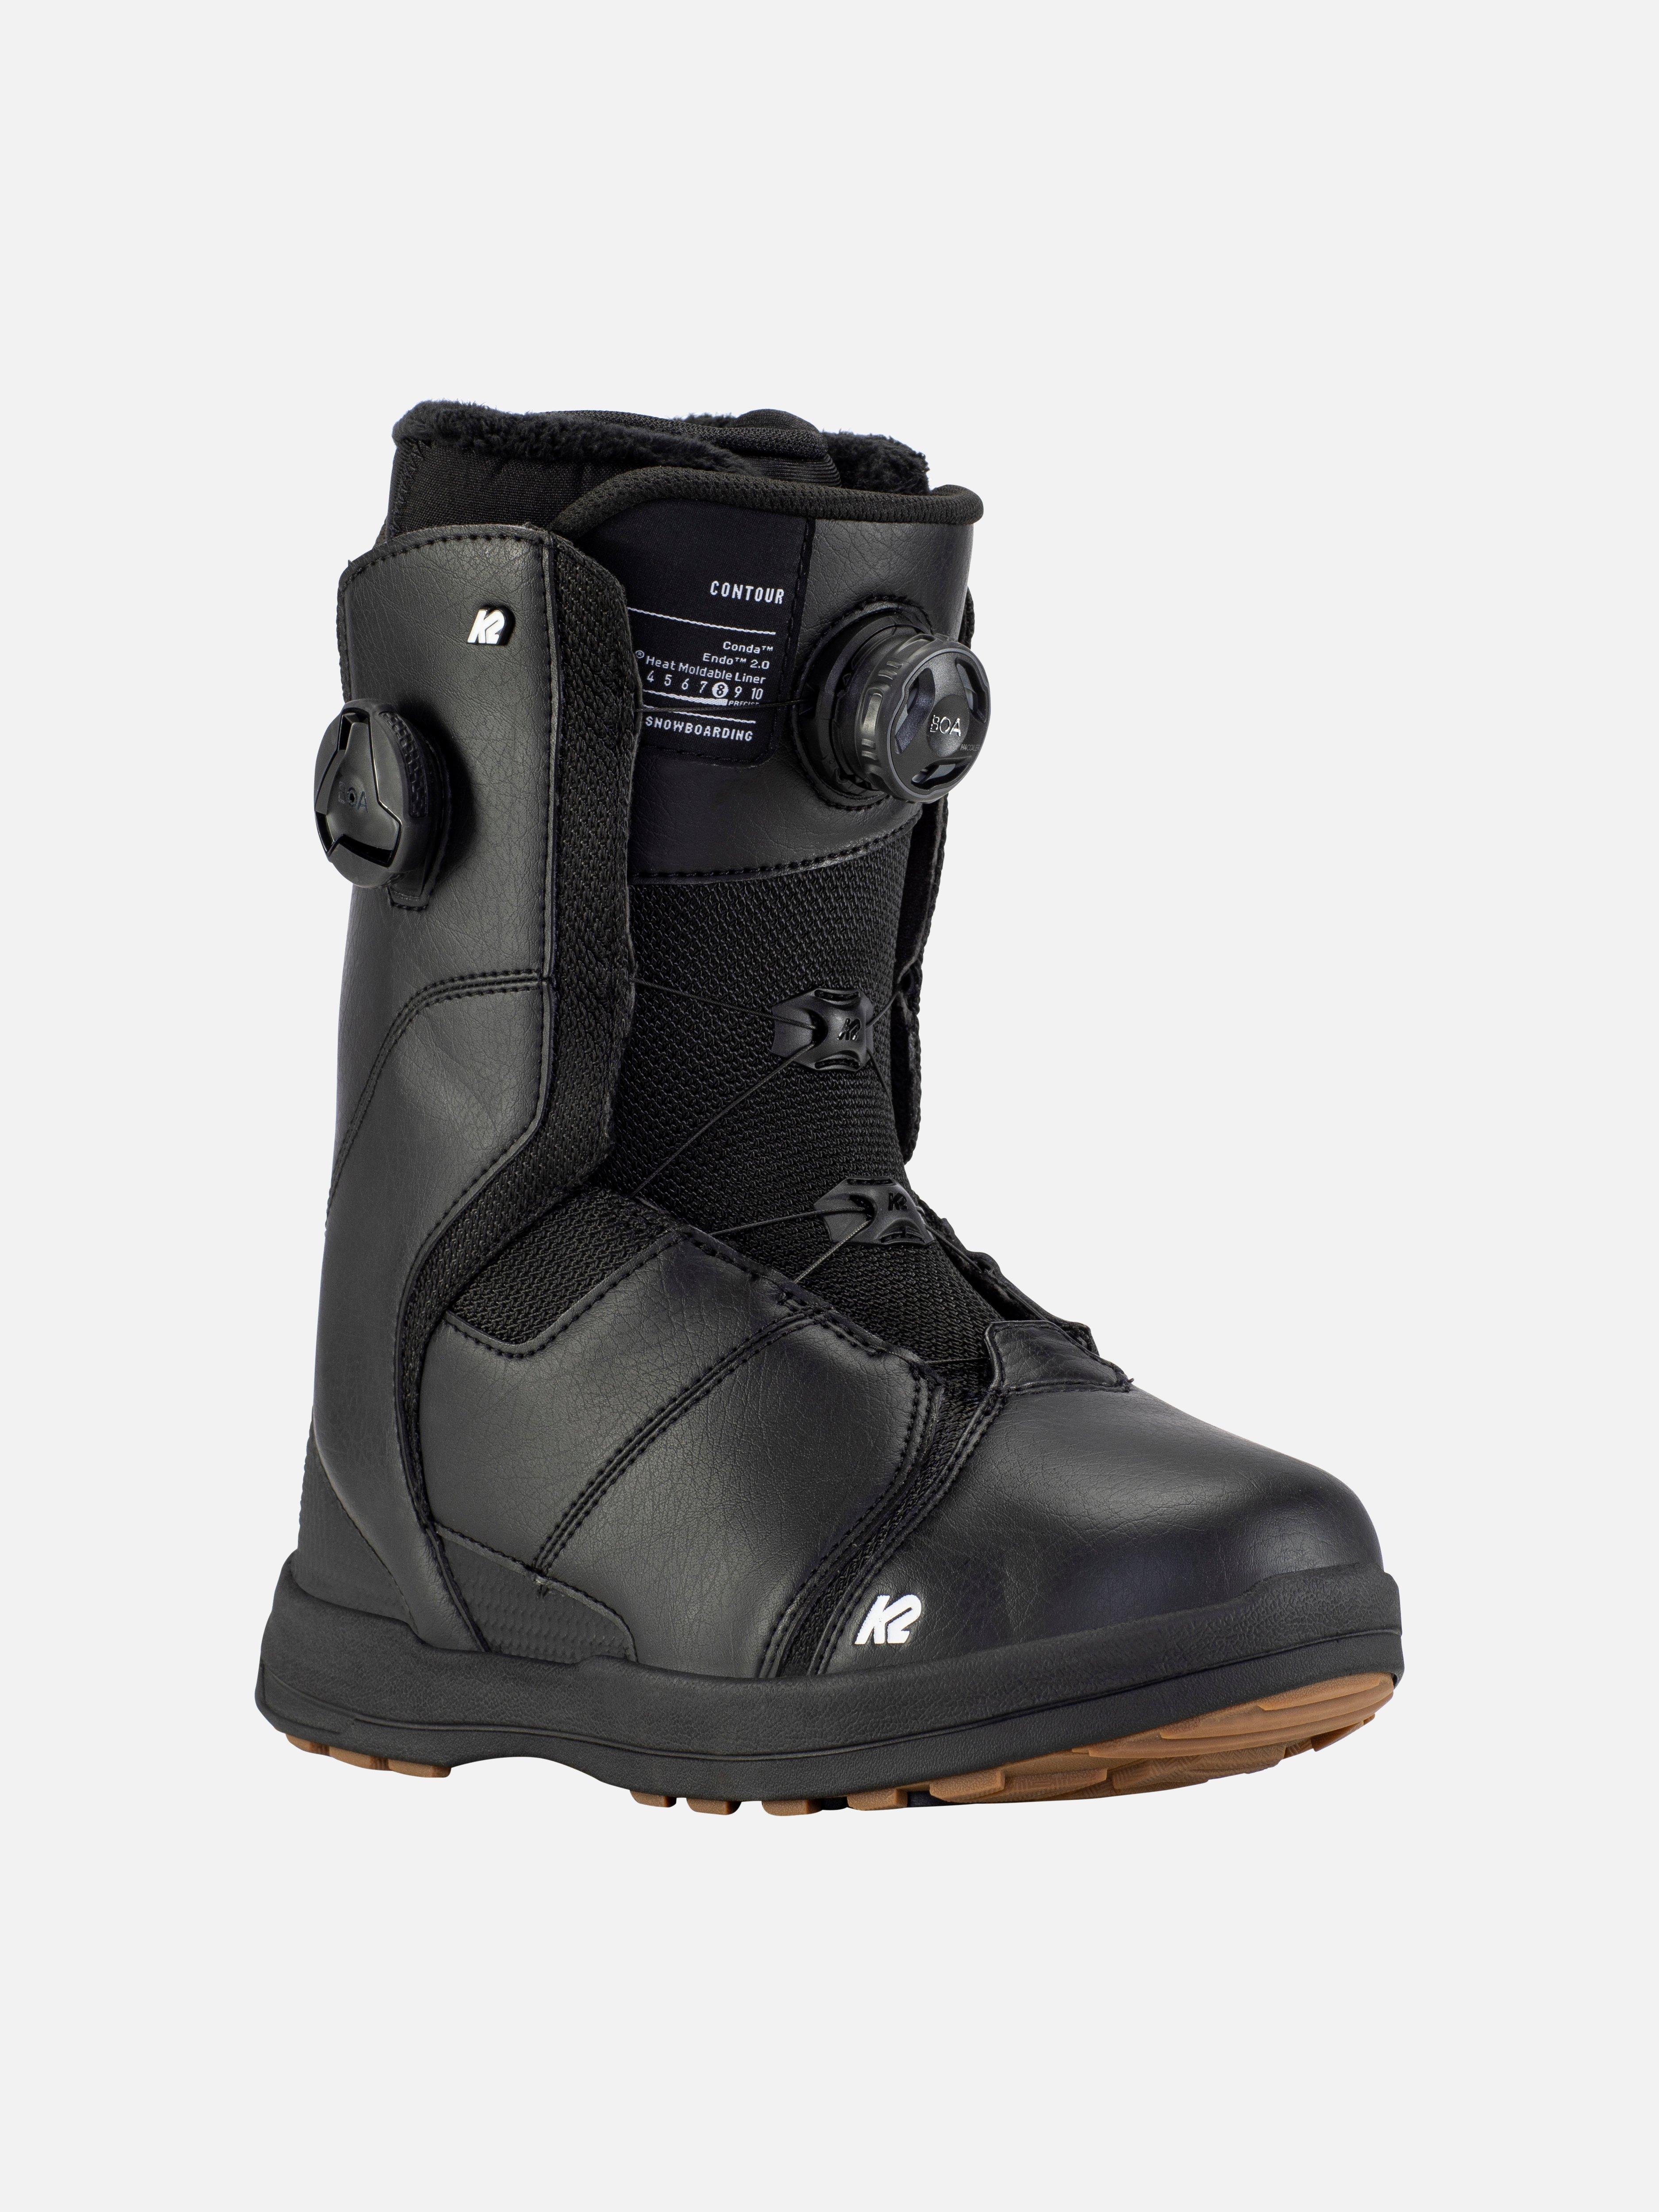 buggy board boots